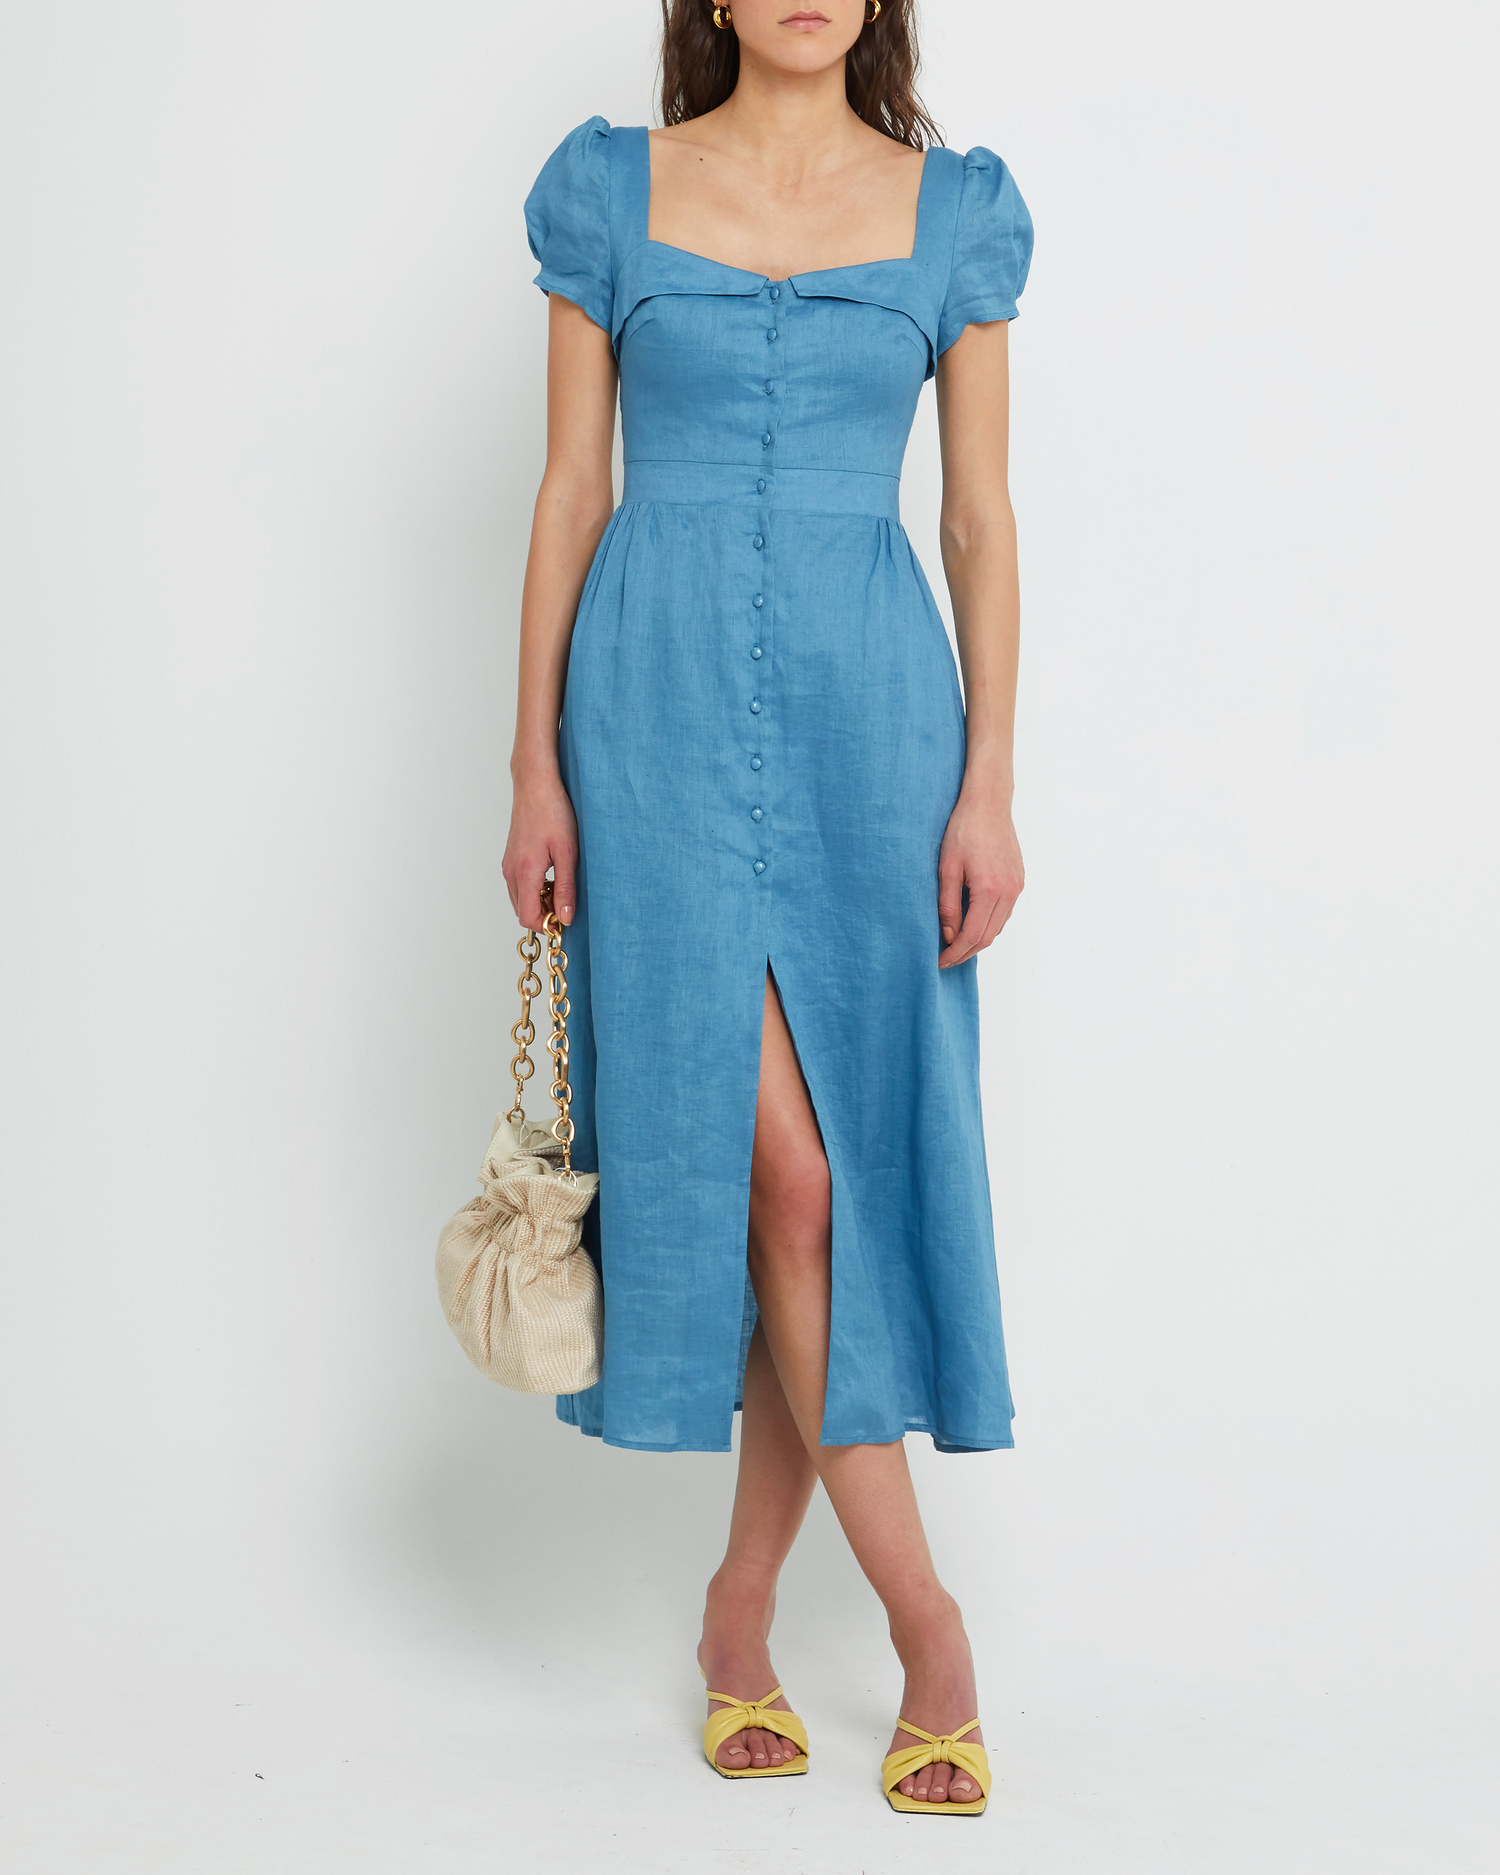 Fourth image of Ryder Dress, a blue maxi dress, button up, bodice detail, short sleeves, cap sleeves